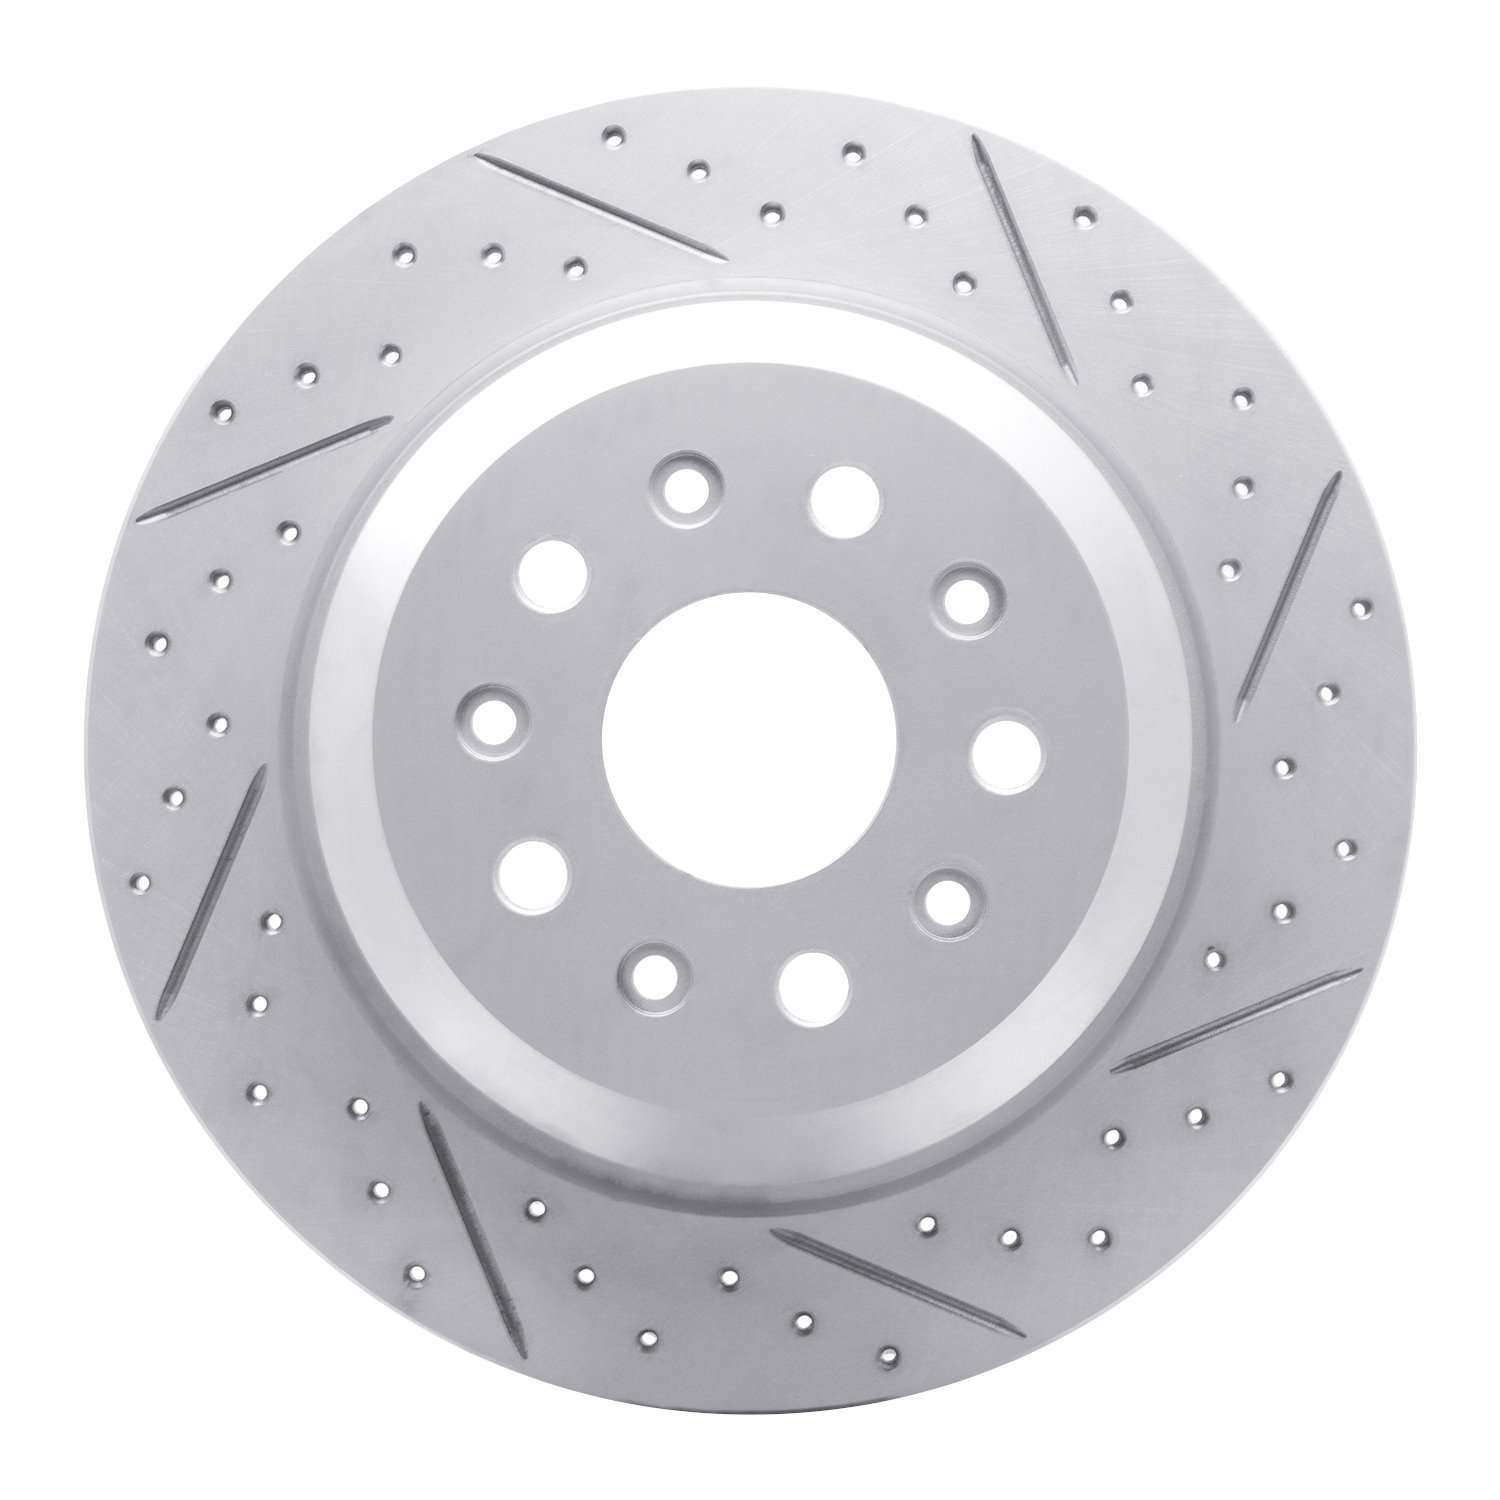 830-42042R Geoperformance Drilled/Slotted Brake Rotor, Fits Select Mopar, Position: Rear Right